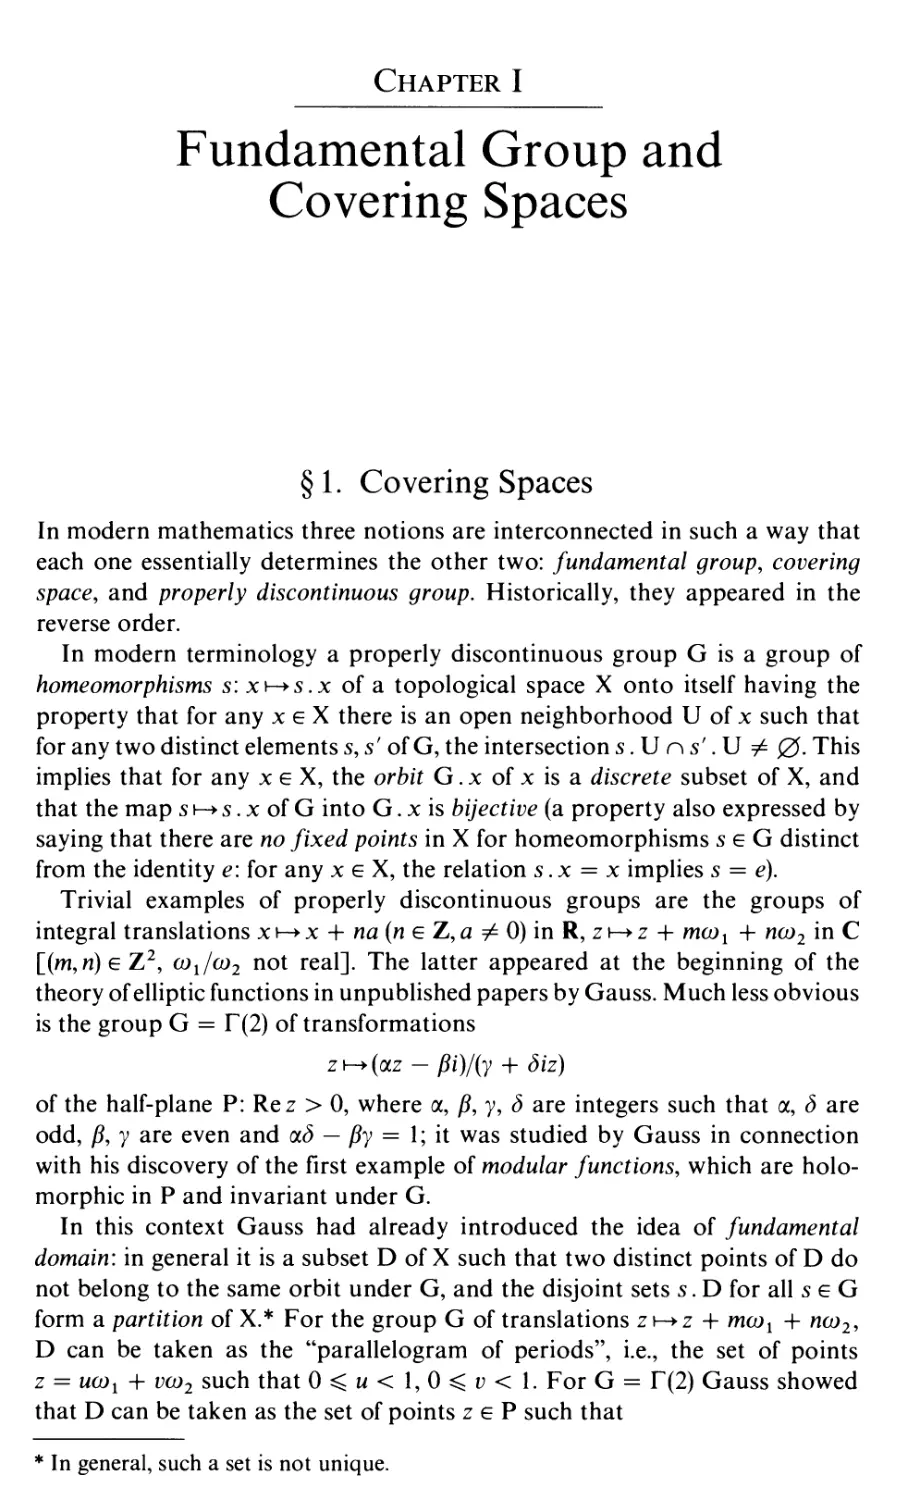 Chapter I. Fundamental Group and Covering Spaces